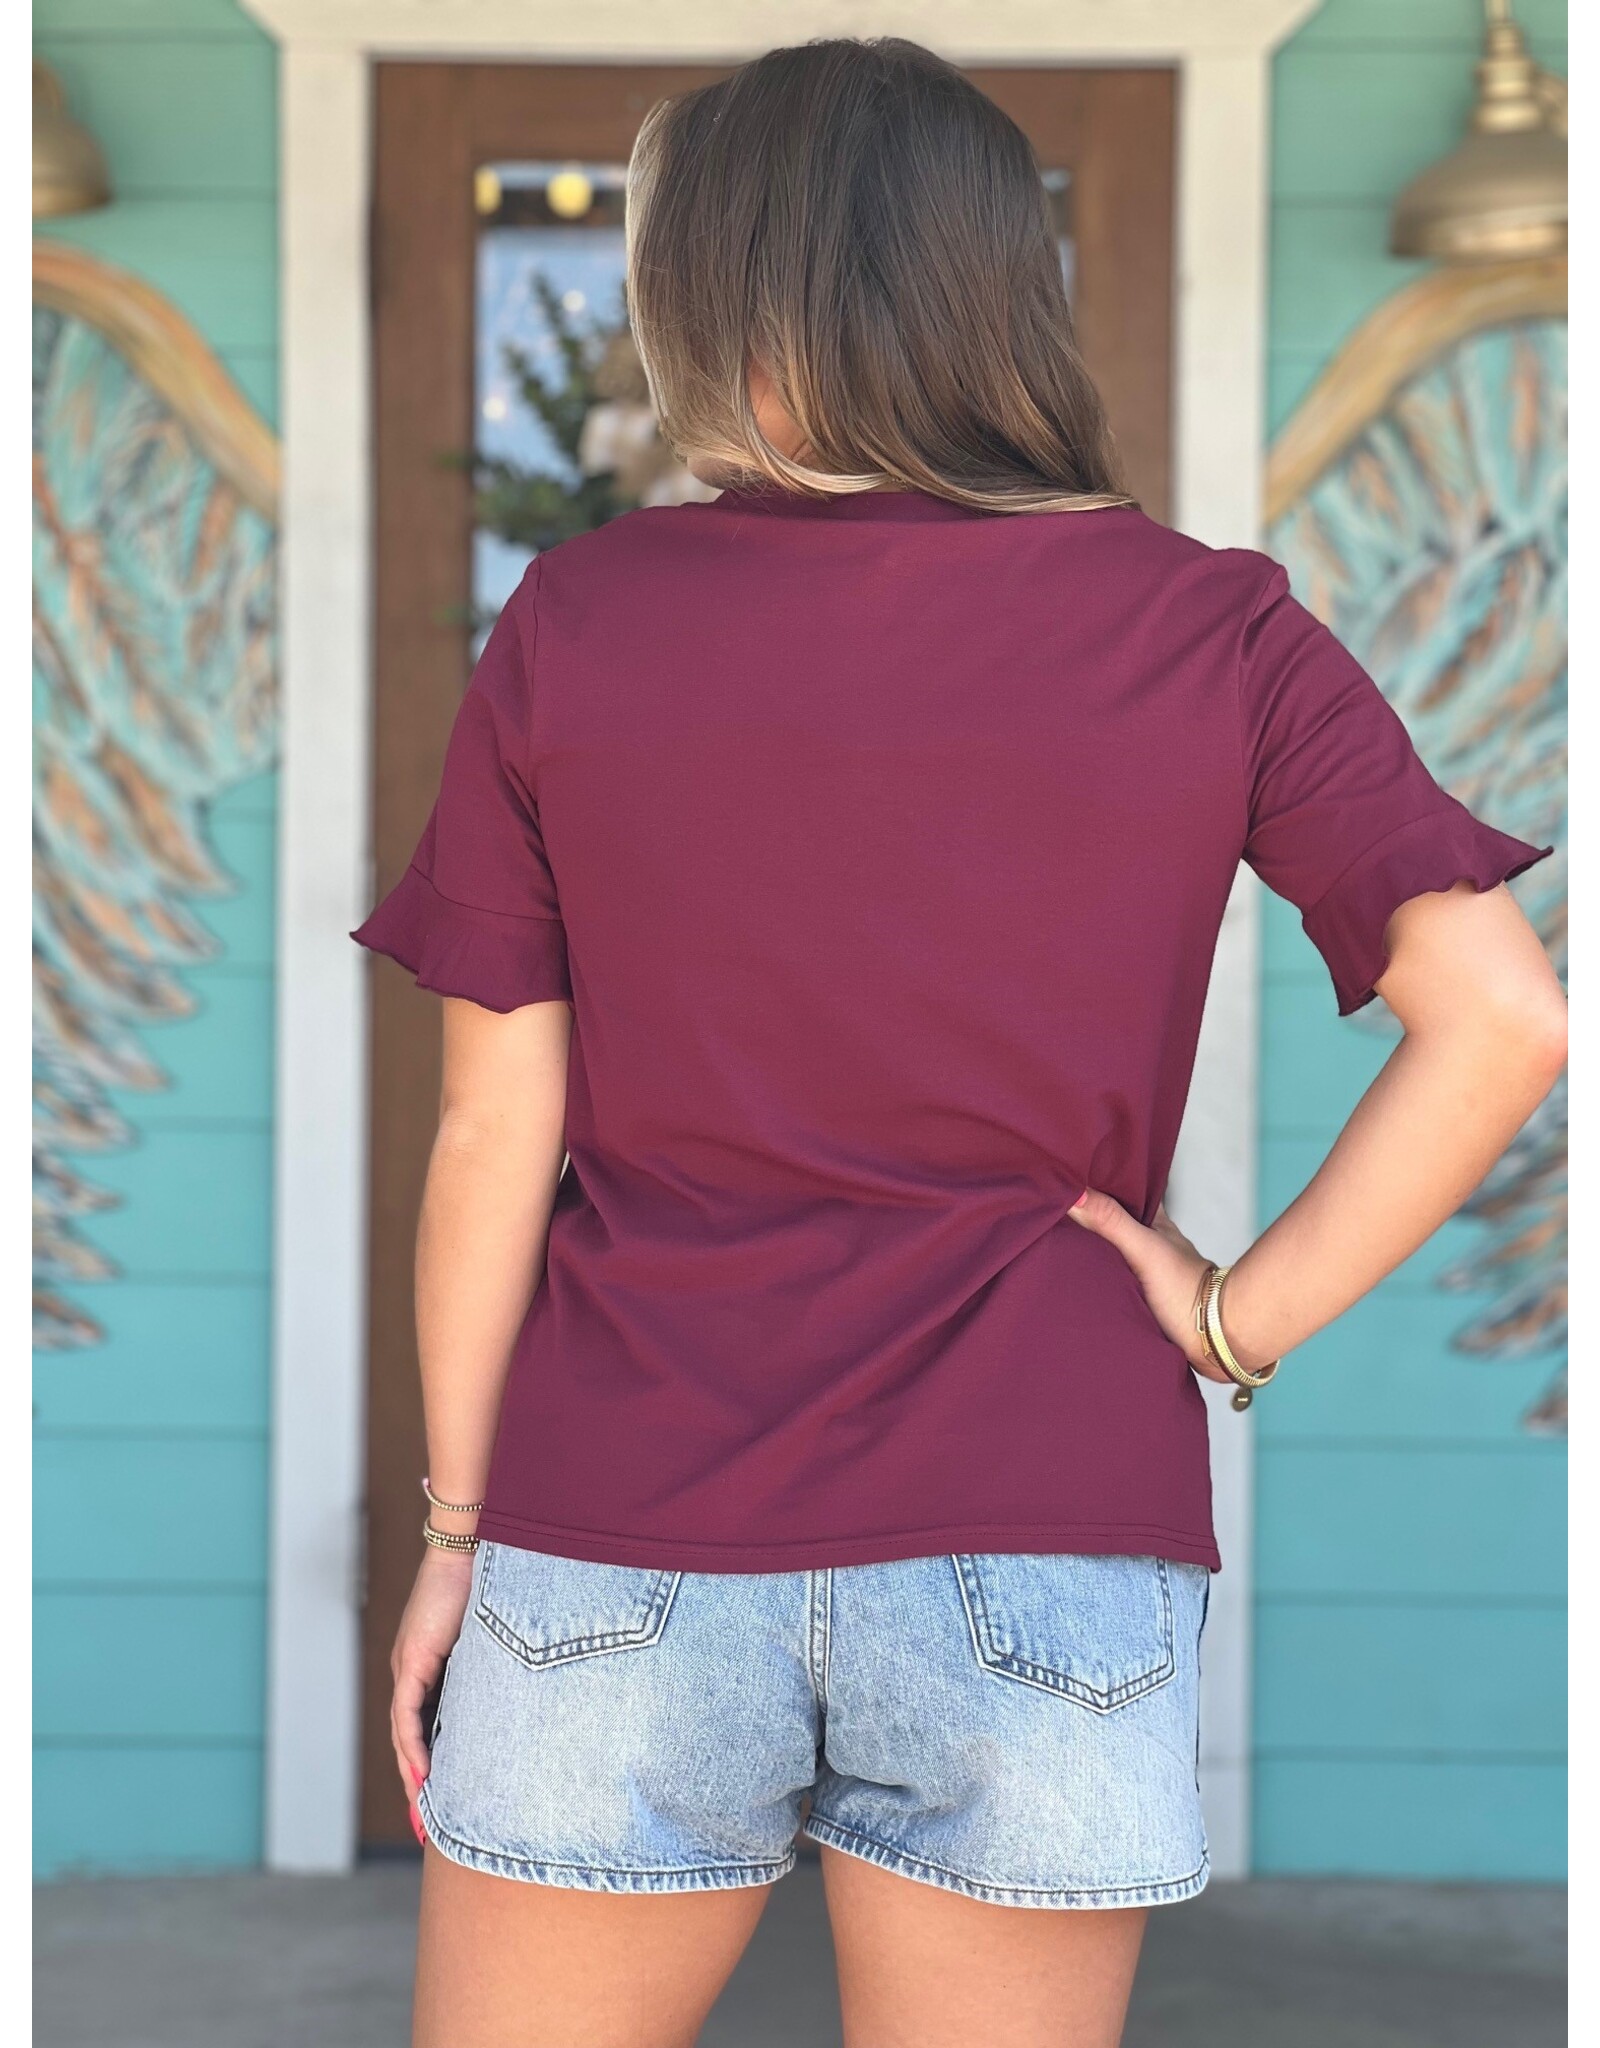 Maroon Howdy Embroidered Tee